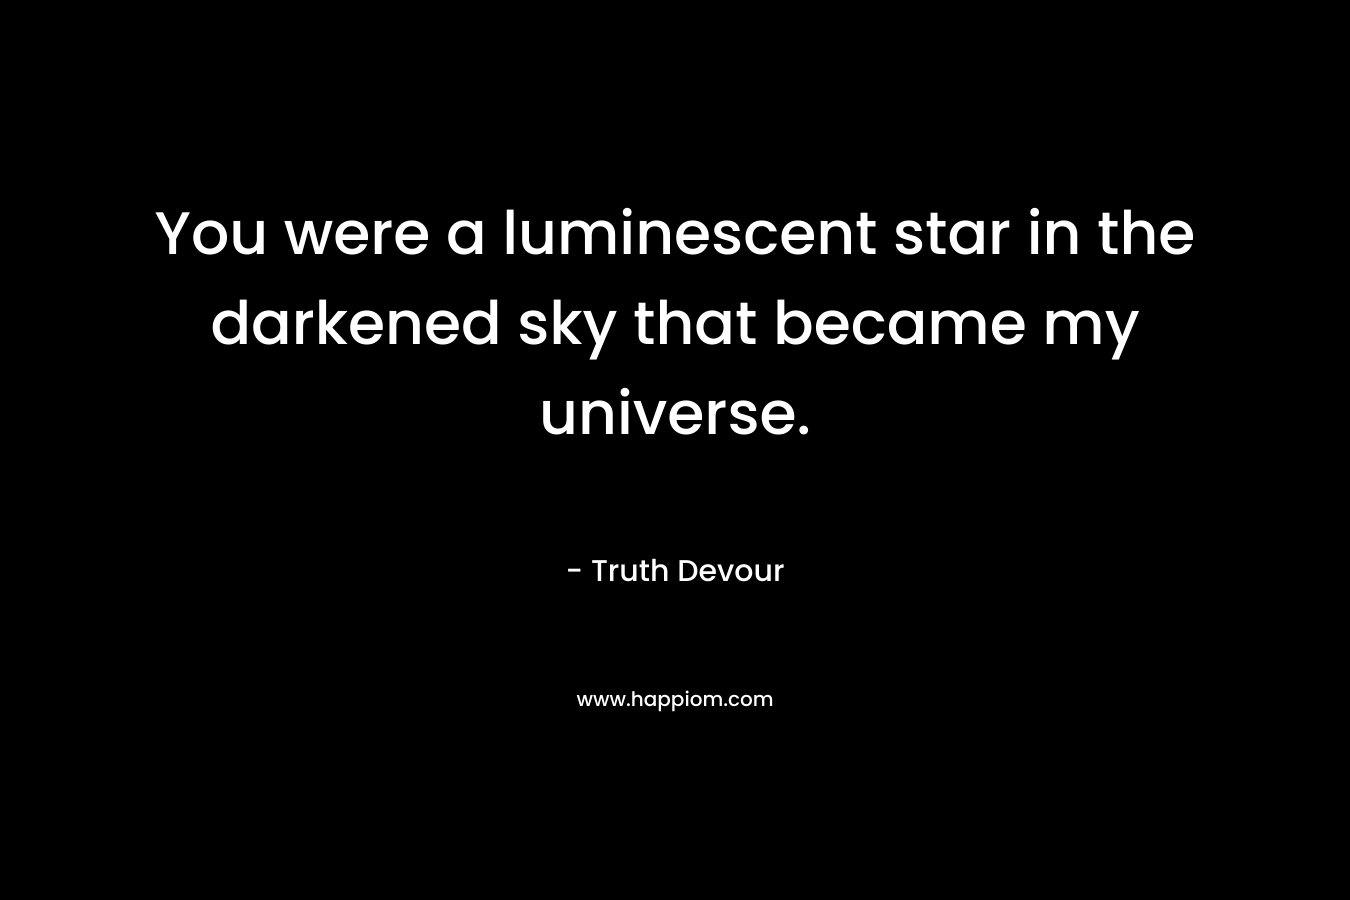 You were a luminescent star in the darkened sky that became my universe. – Truth Devour